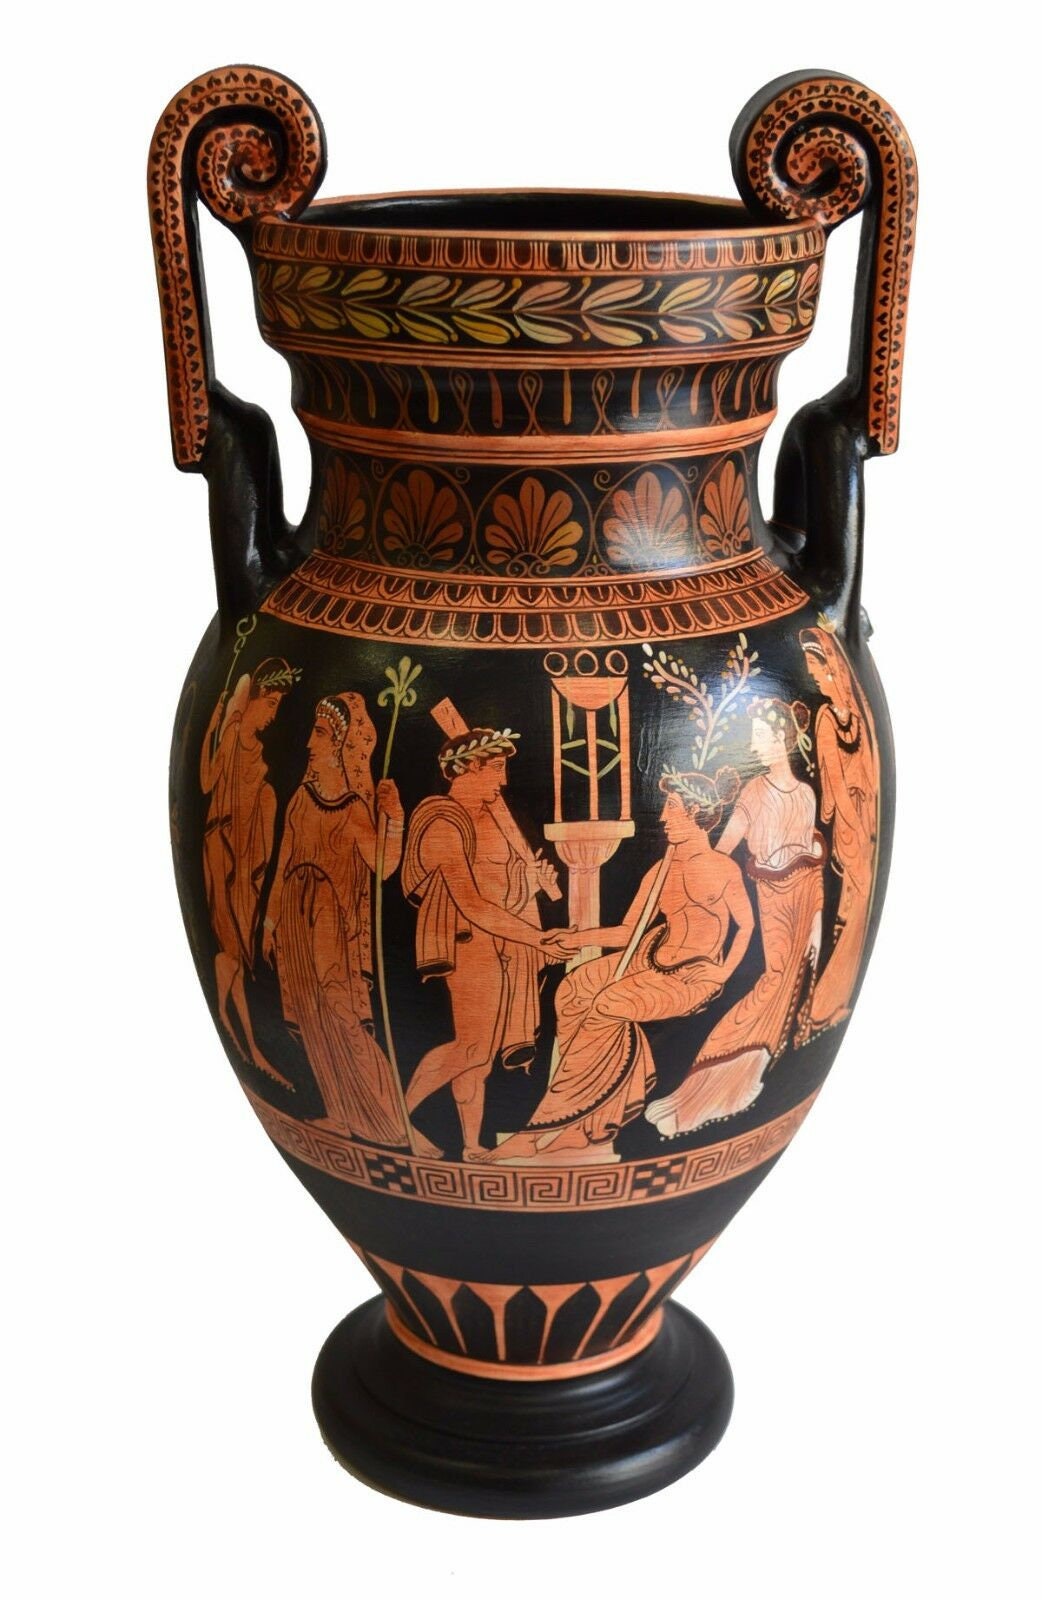 Hades  with Persephone on Chariot - Red Figure Volute Krater Amphora Vase - British Museum - Hermes and Hecate